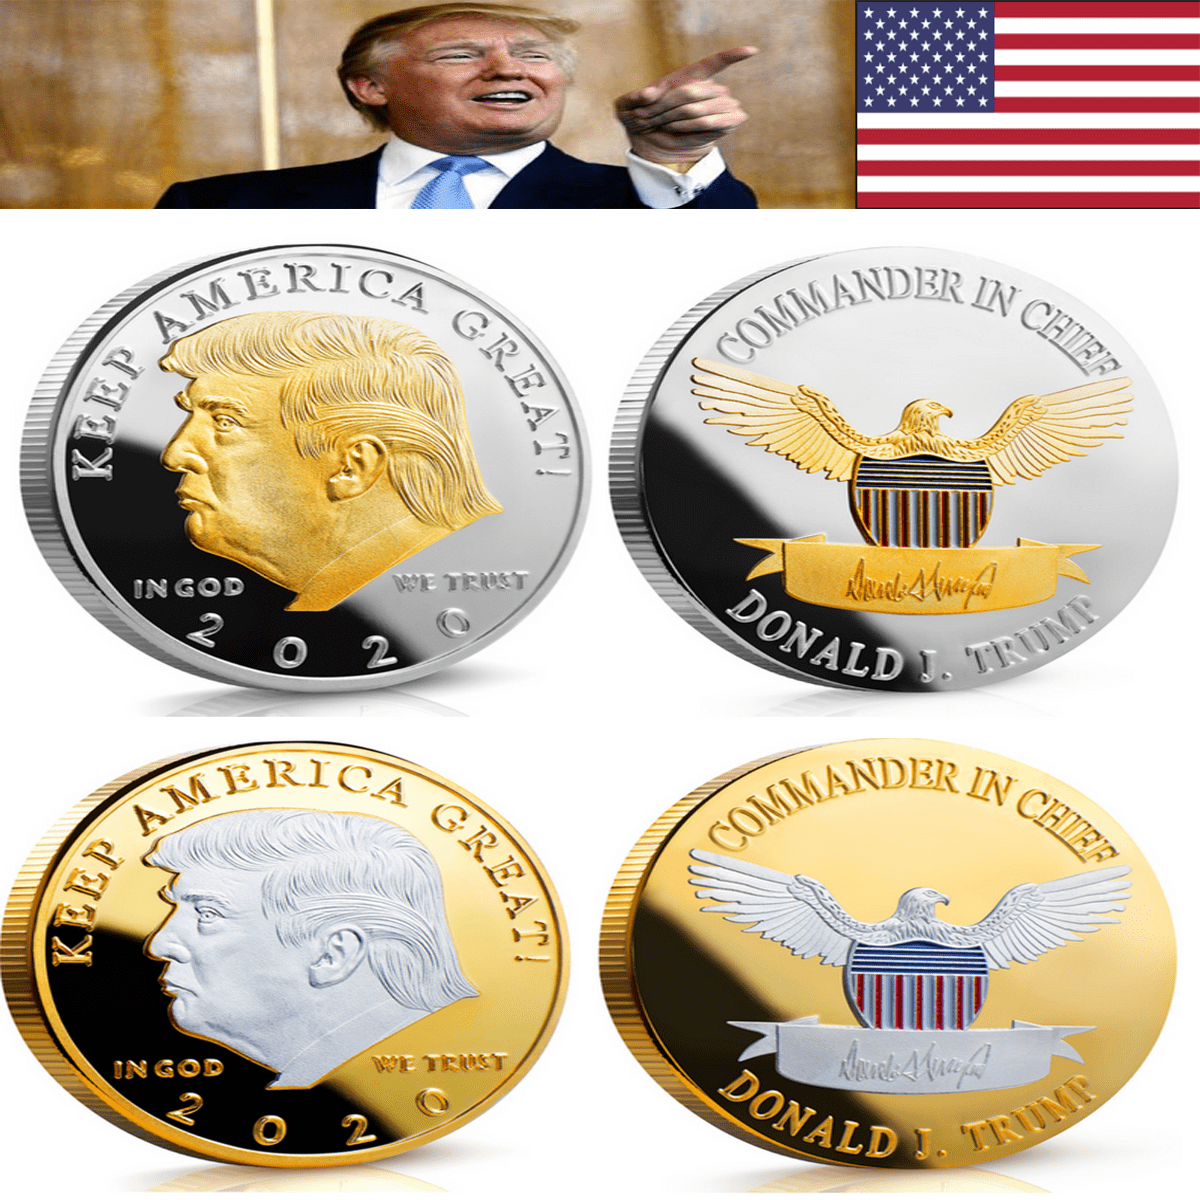 2020 Donald Trump US President Eagle Coin Keep American Great Gift Silver Gold